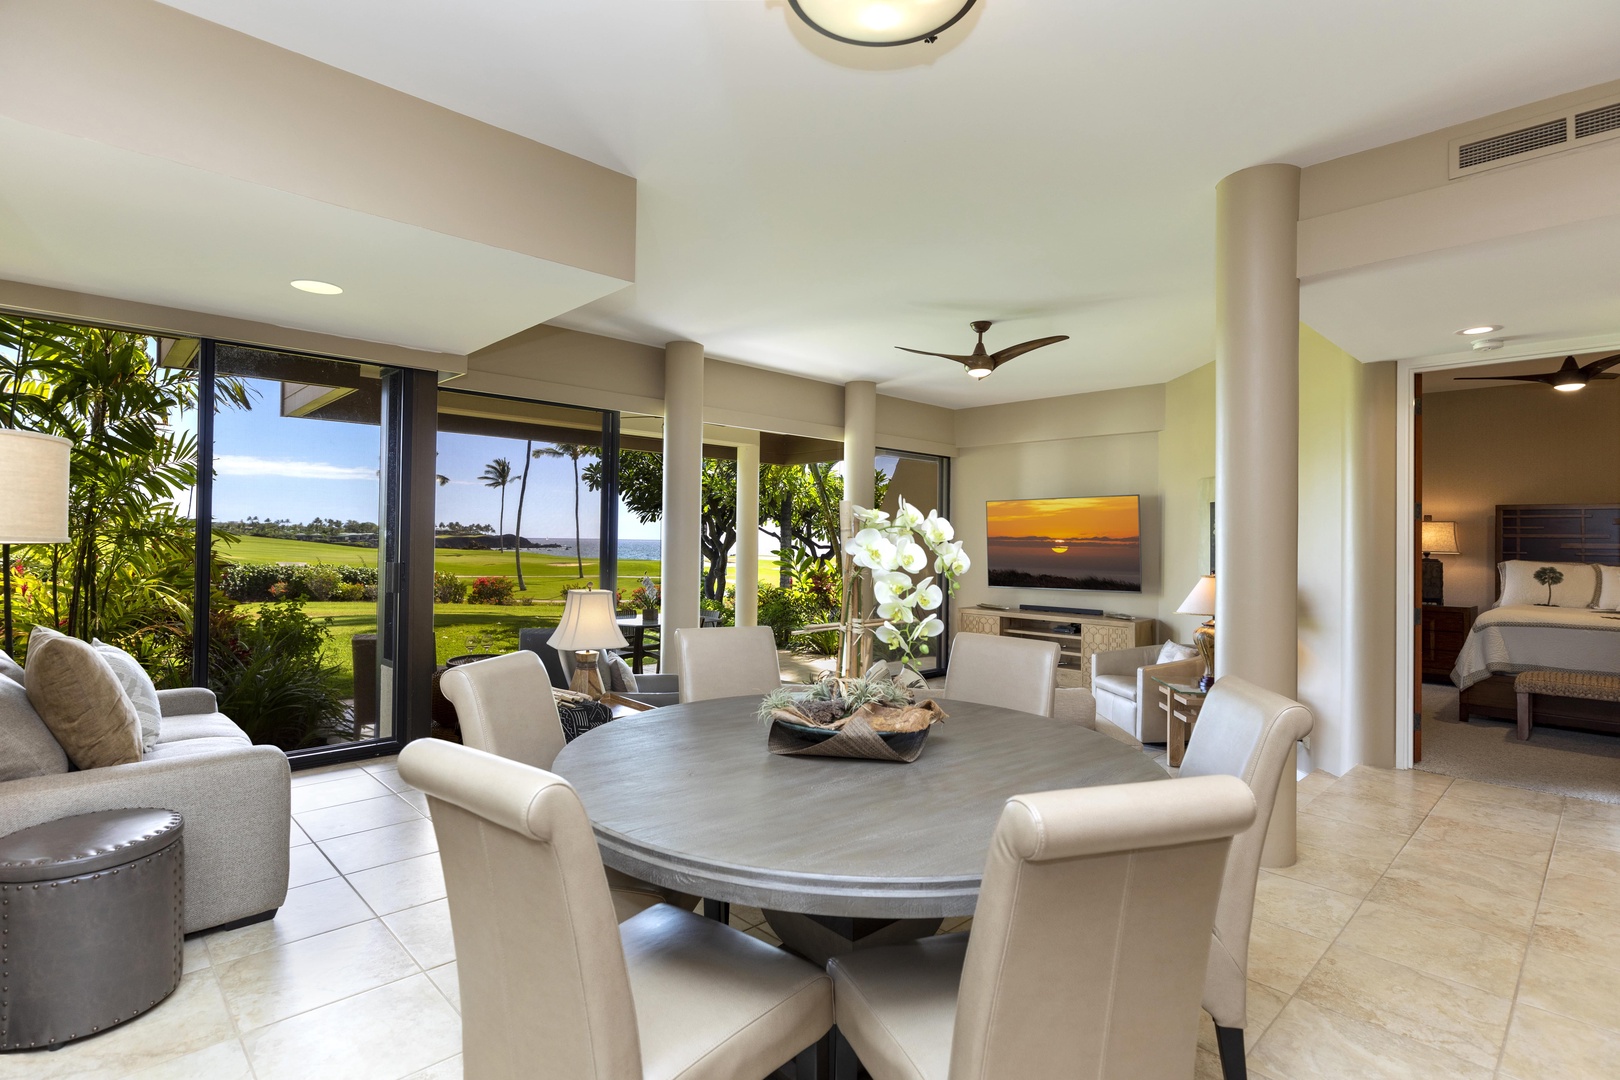 Kamuela Vacation Rentals, Mauna Lani Point E105 - Enjoy a meal indoors while having views and being close to the chef.